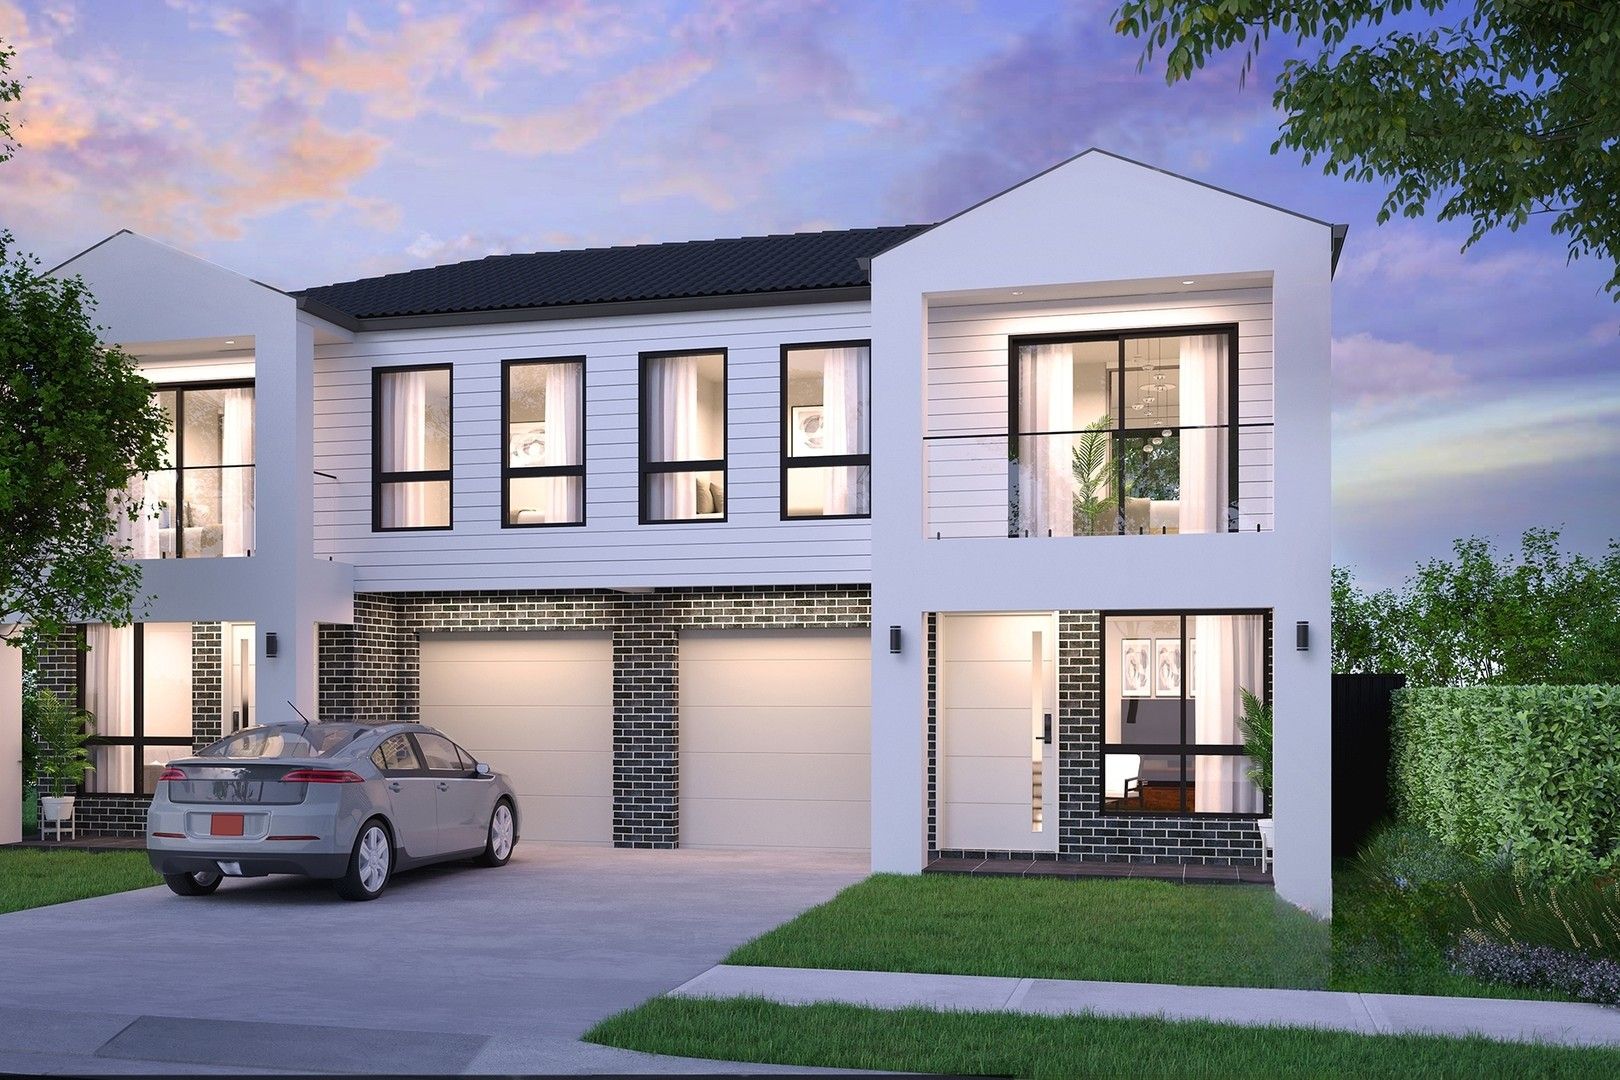 3 bedrooms New House & Land in 62 Dowse Ave MARSDEN PARK NSW, 2765